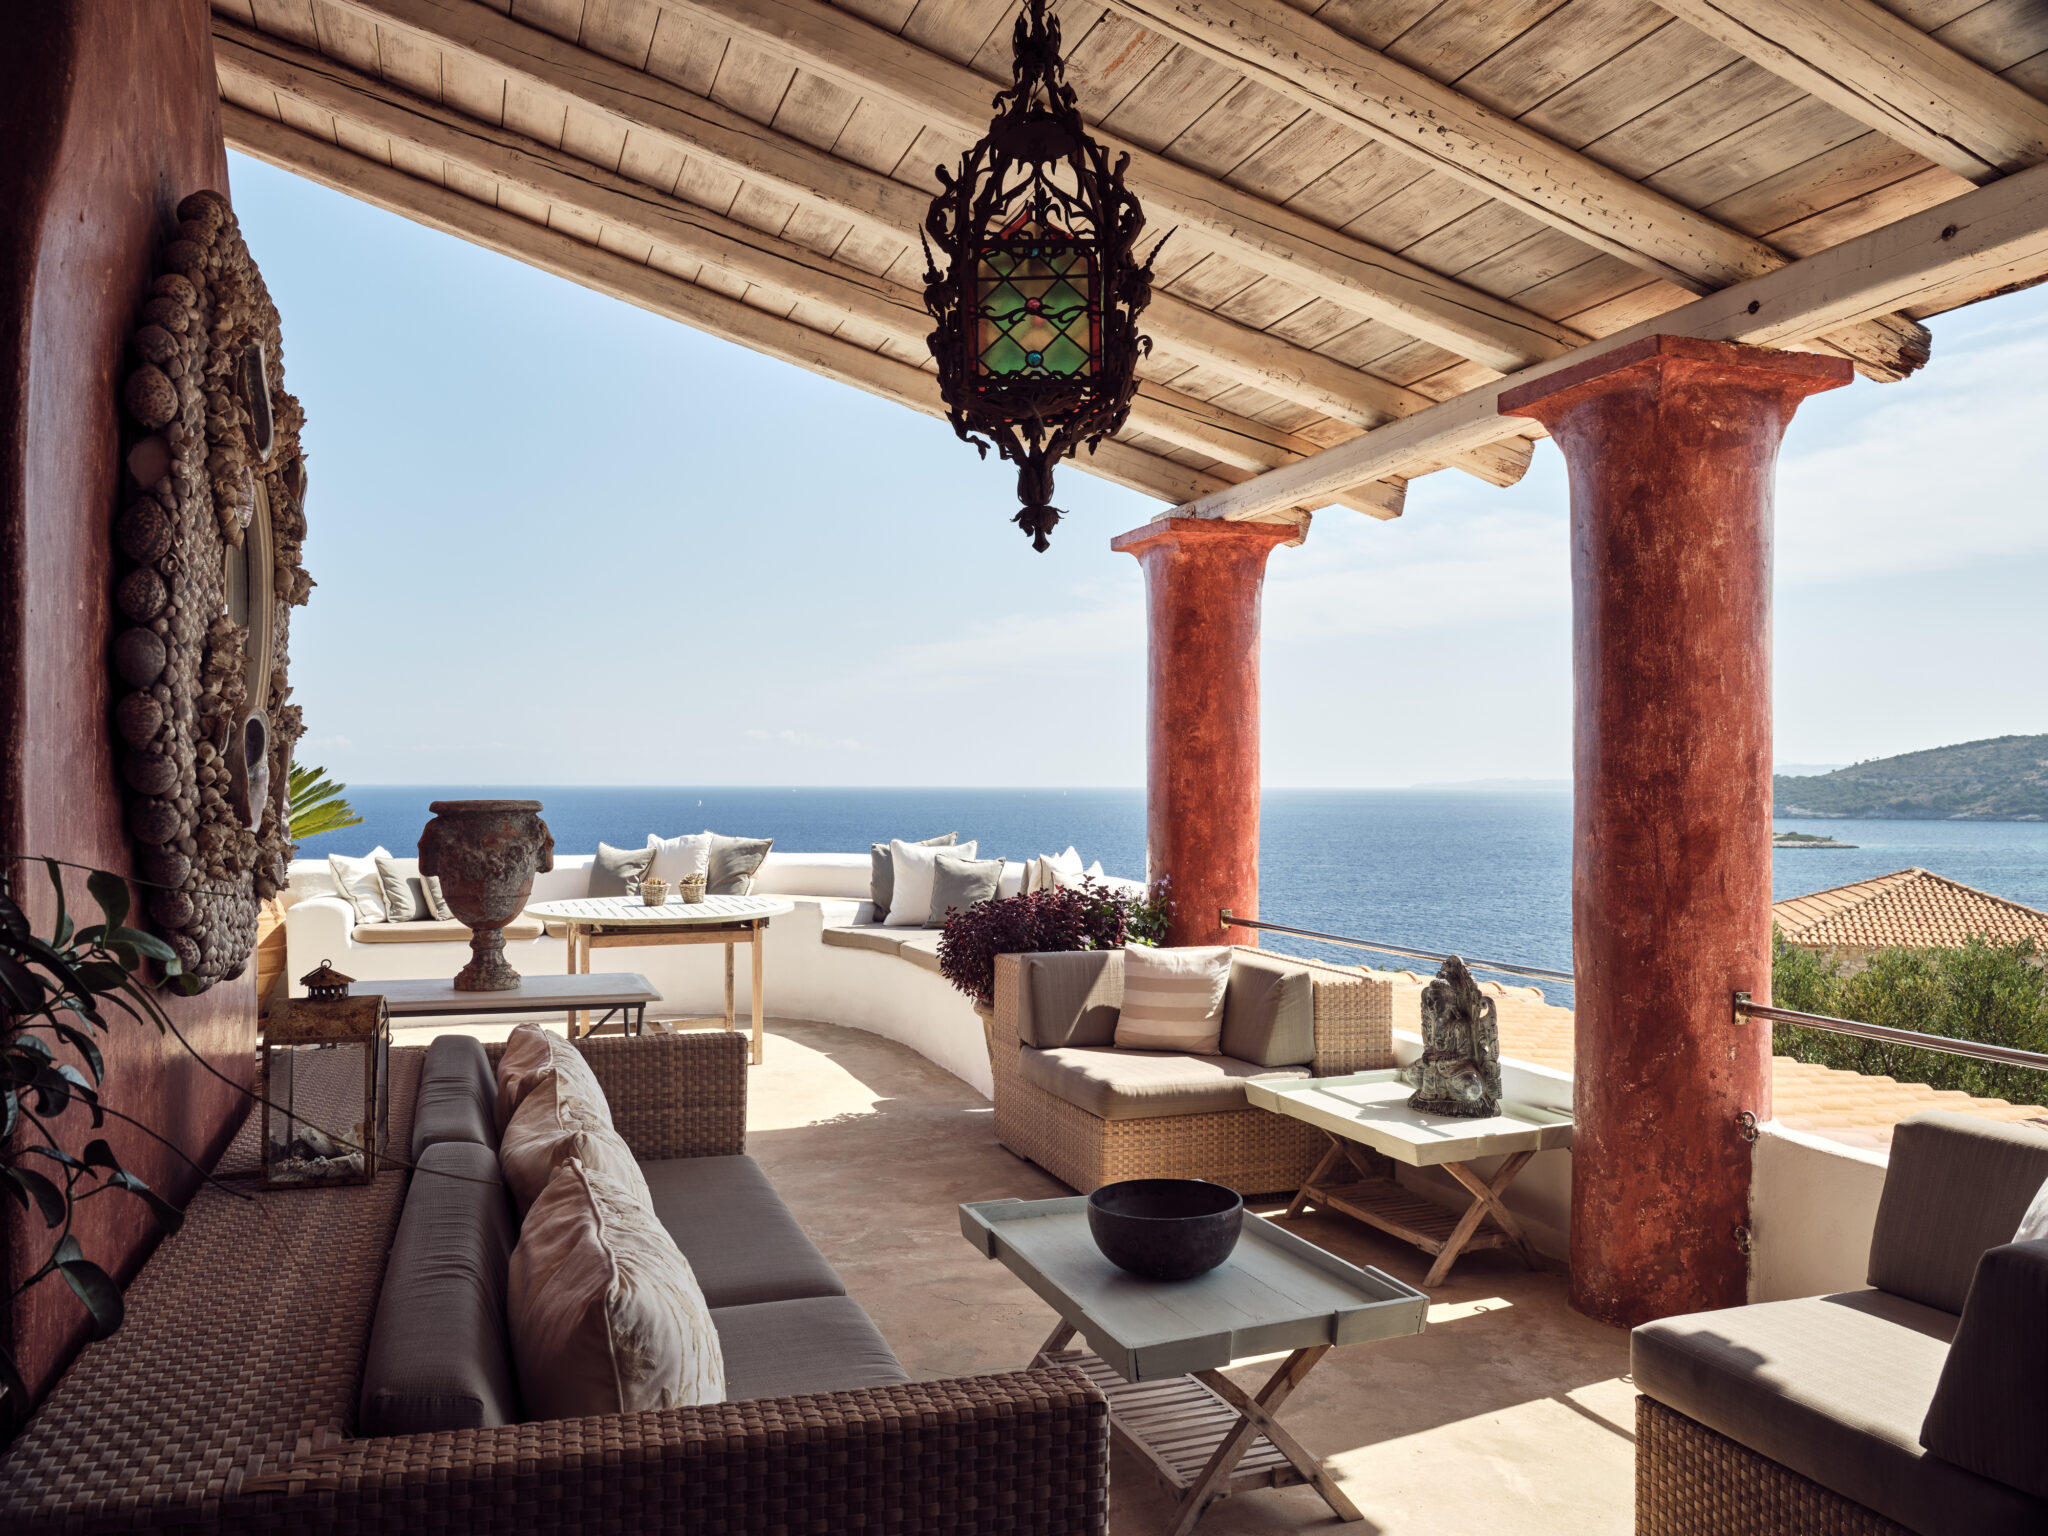 An opulent Italian style red villa with sea views